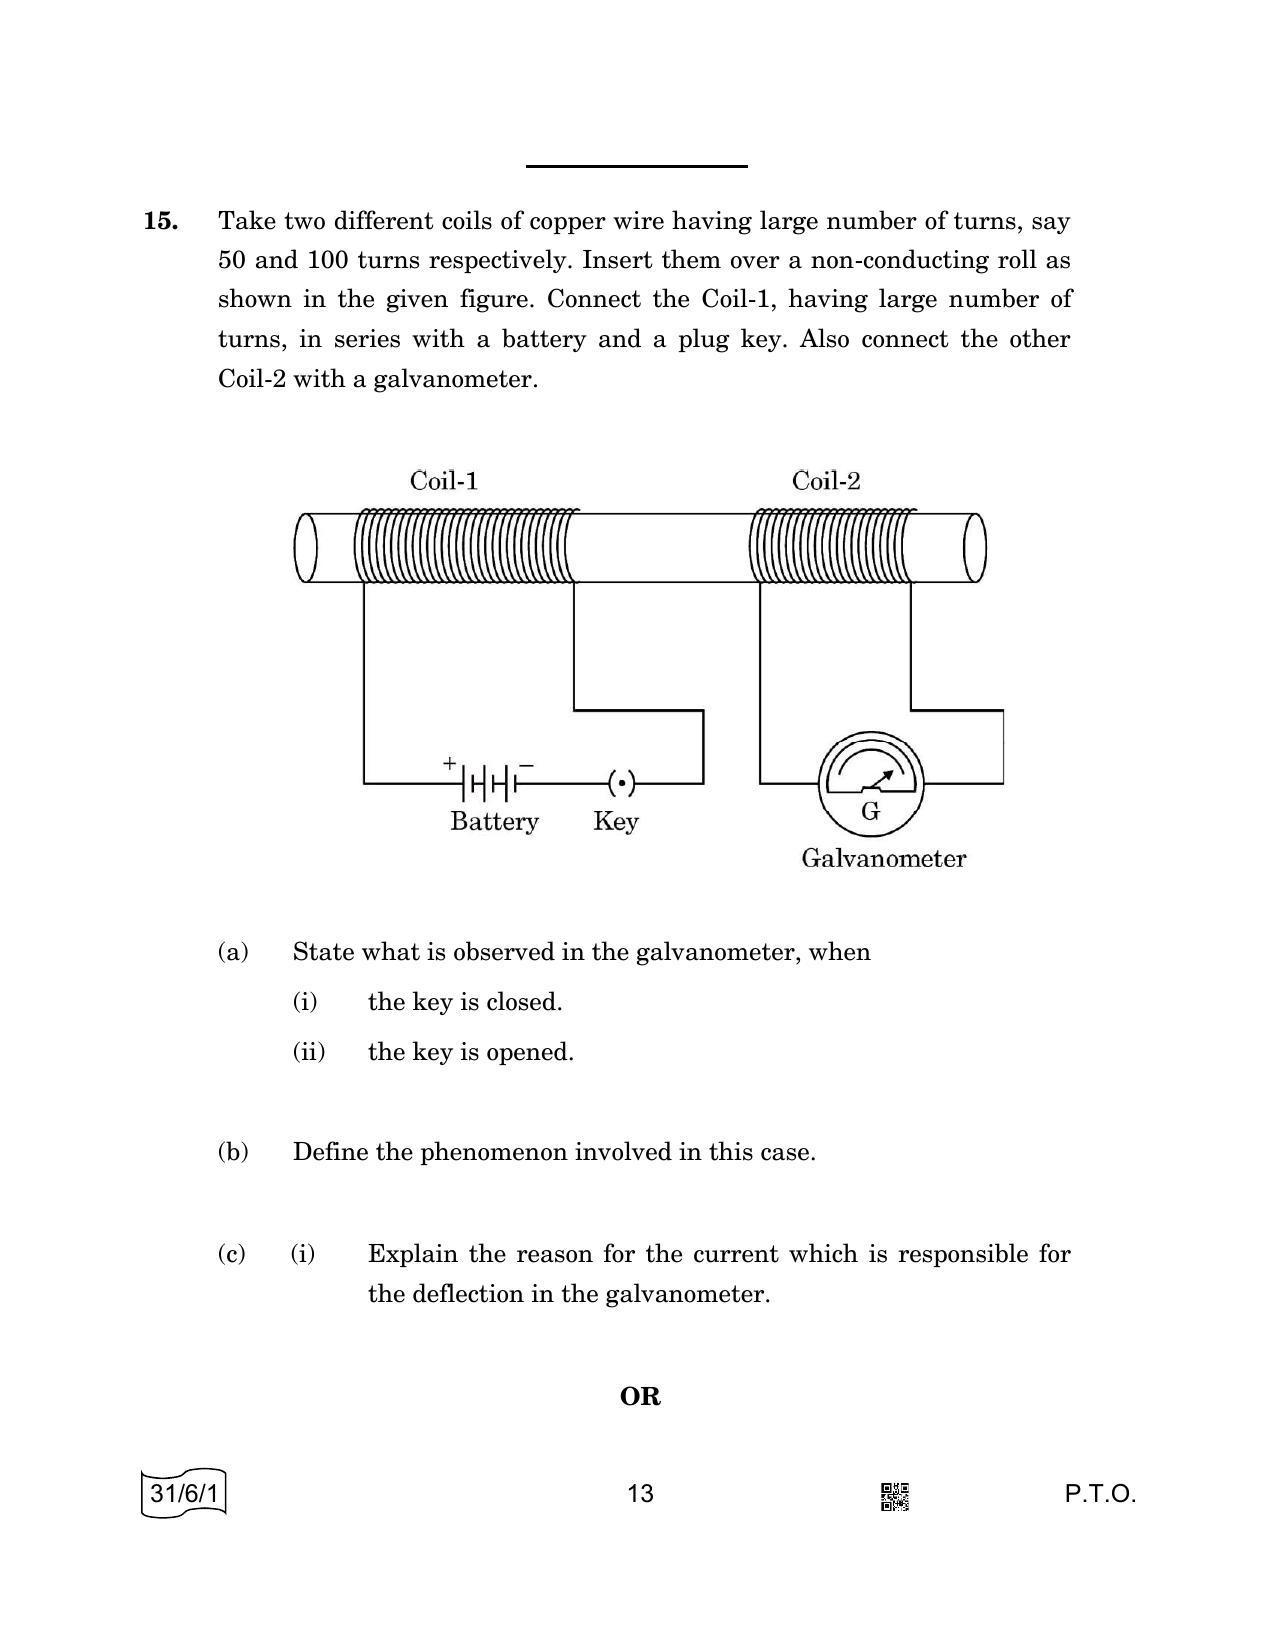 CBSE Class 10 31-6-1 SCIENCE 2022 Compartment Question Paper - Page 13